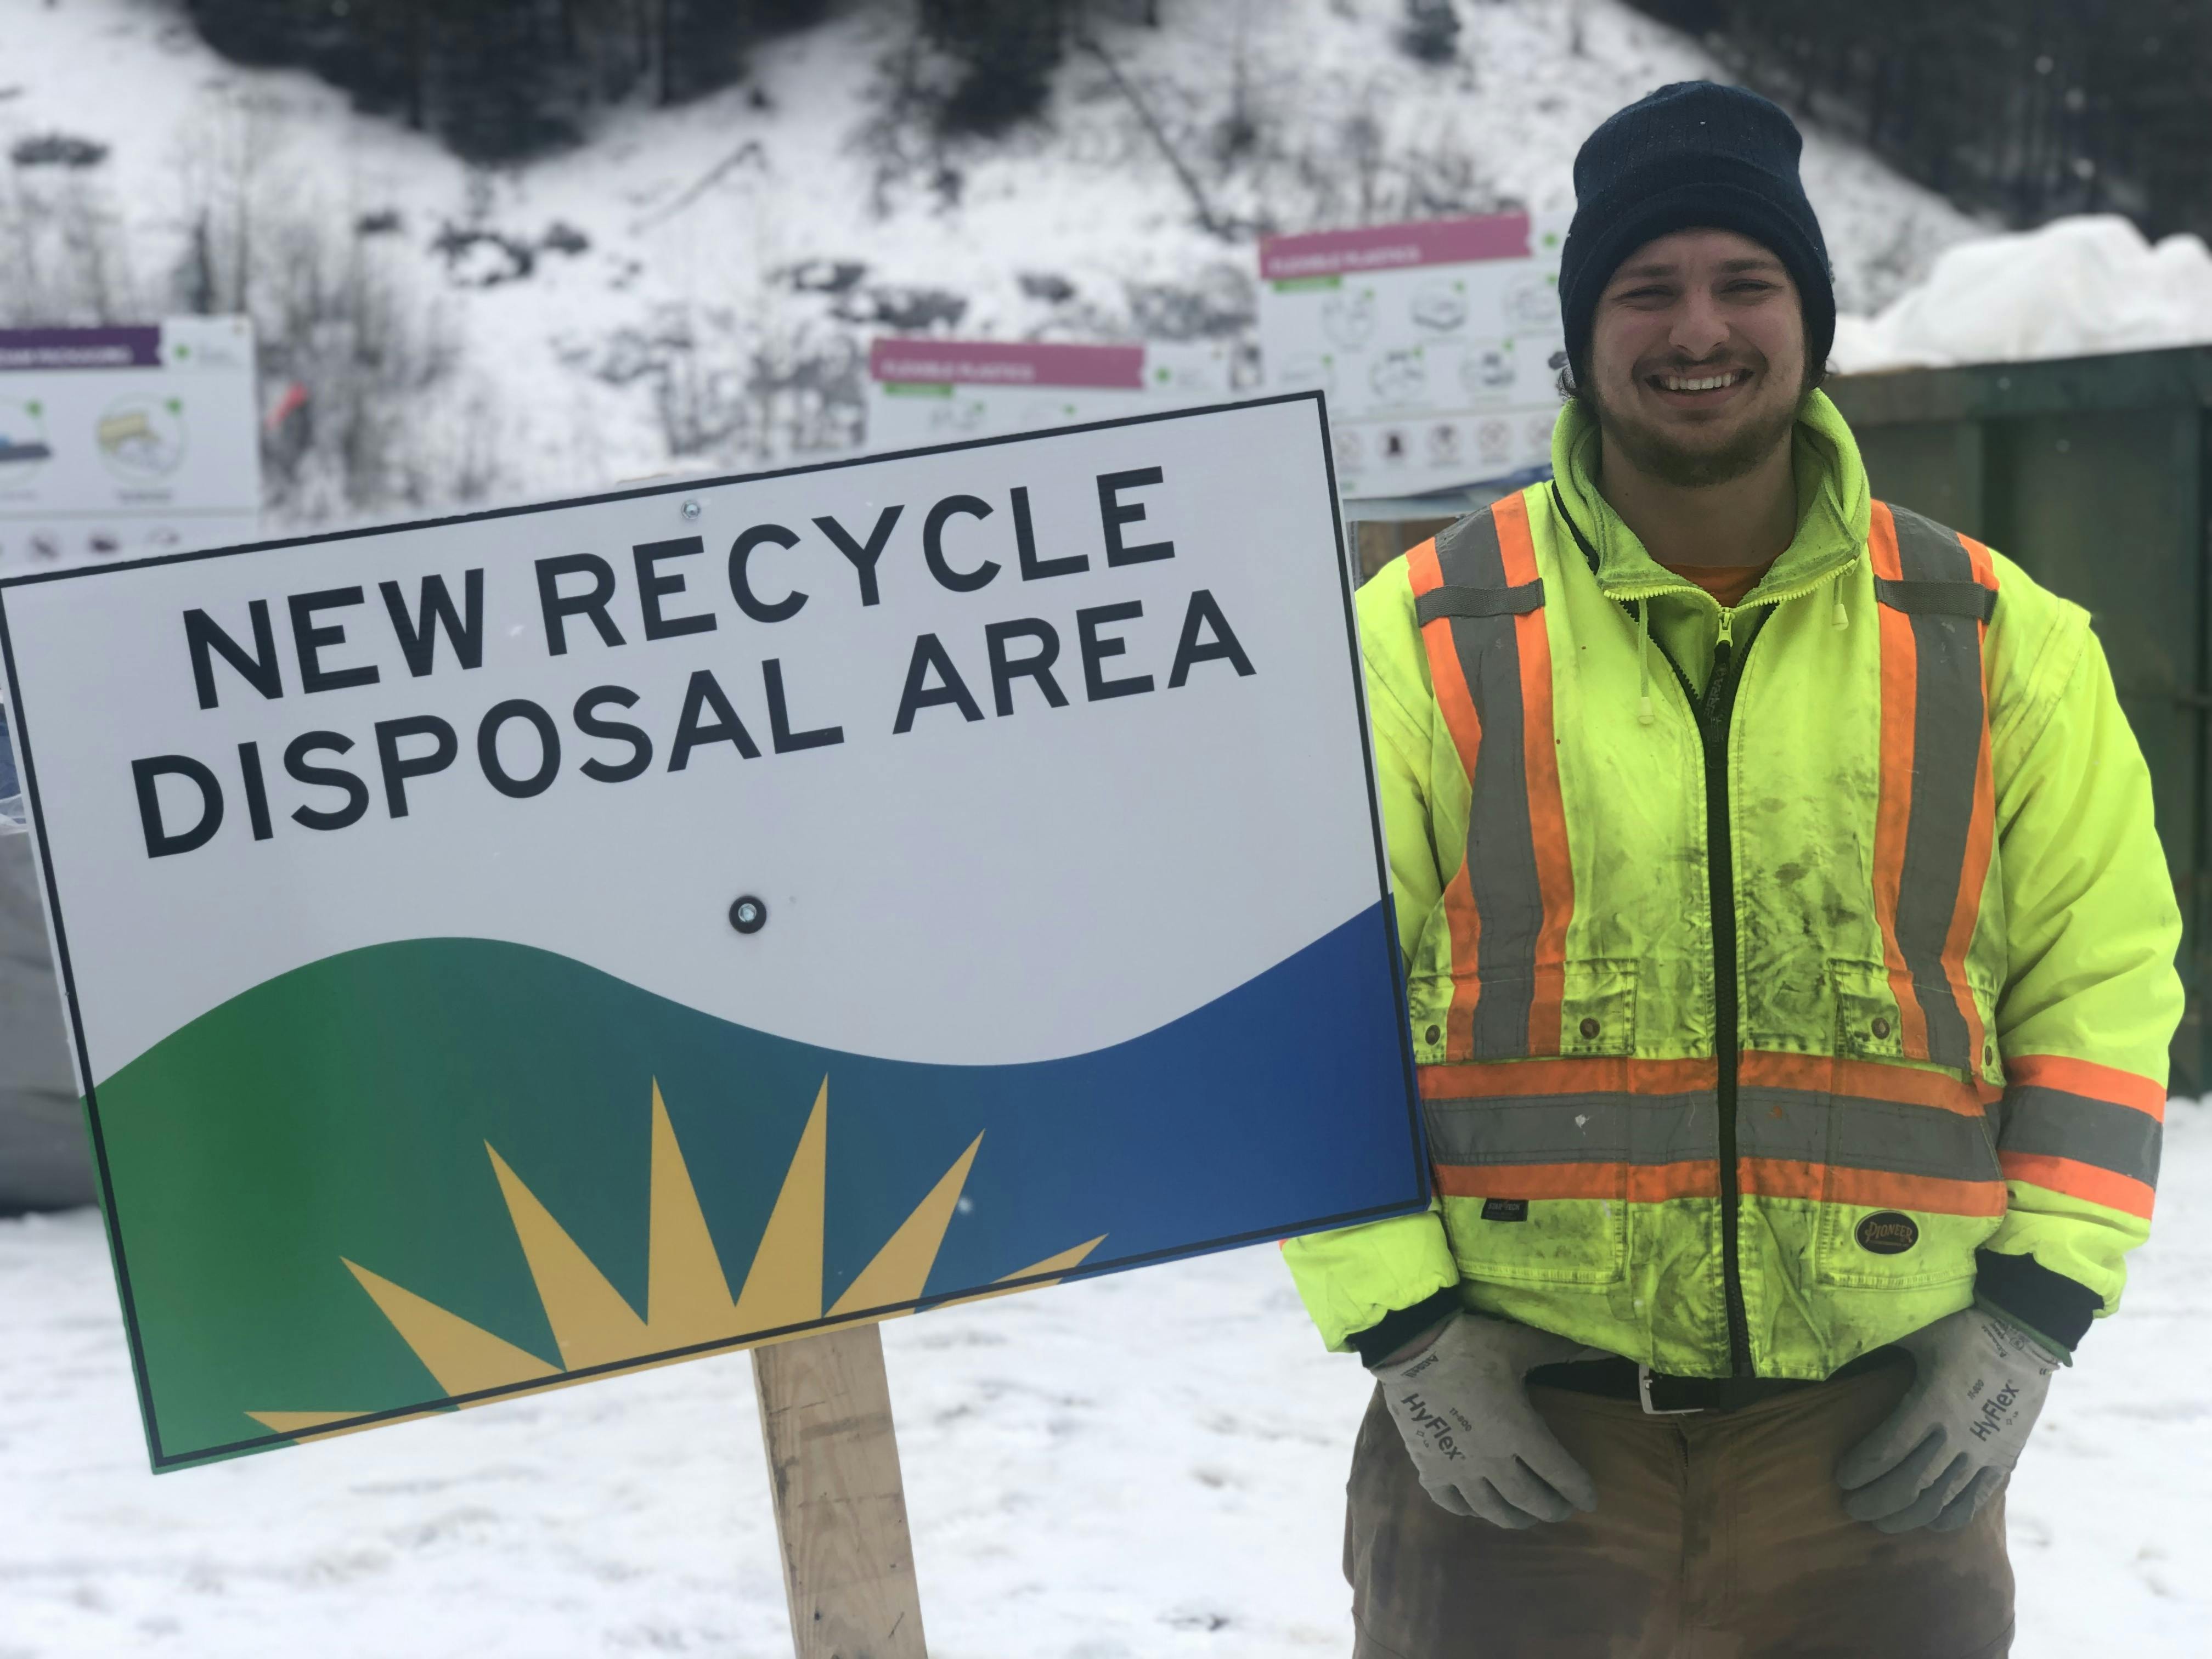 New Recycle Disposal Area (March)